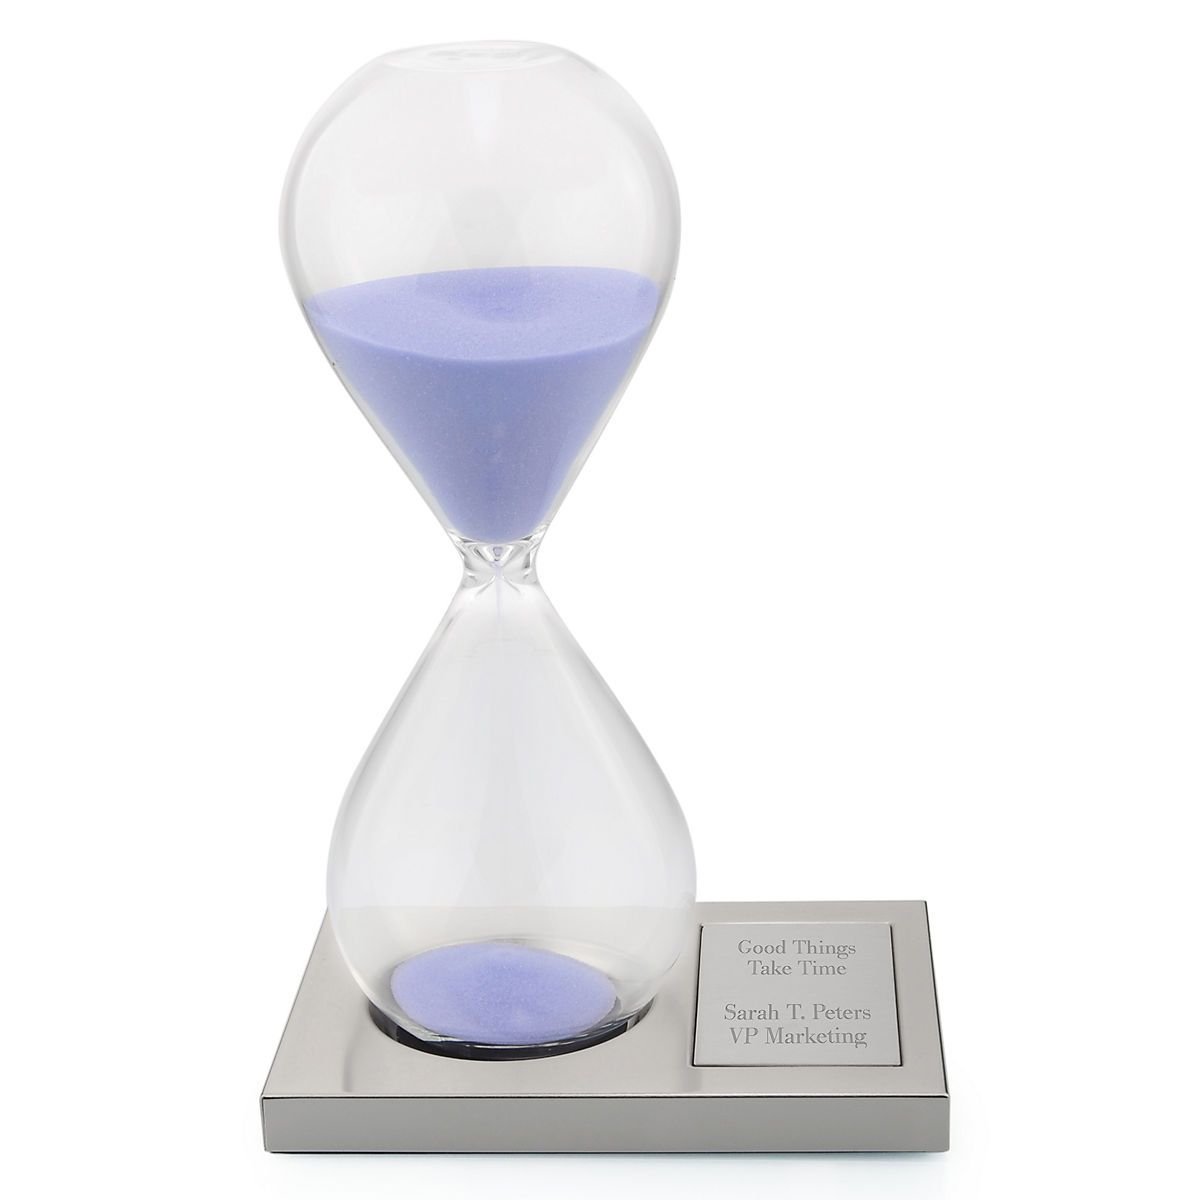 Sand Timer Hourglass 20 second